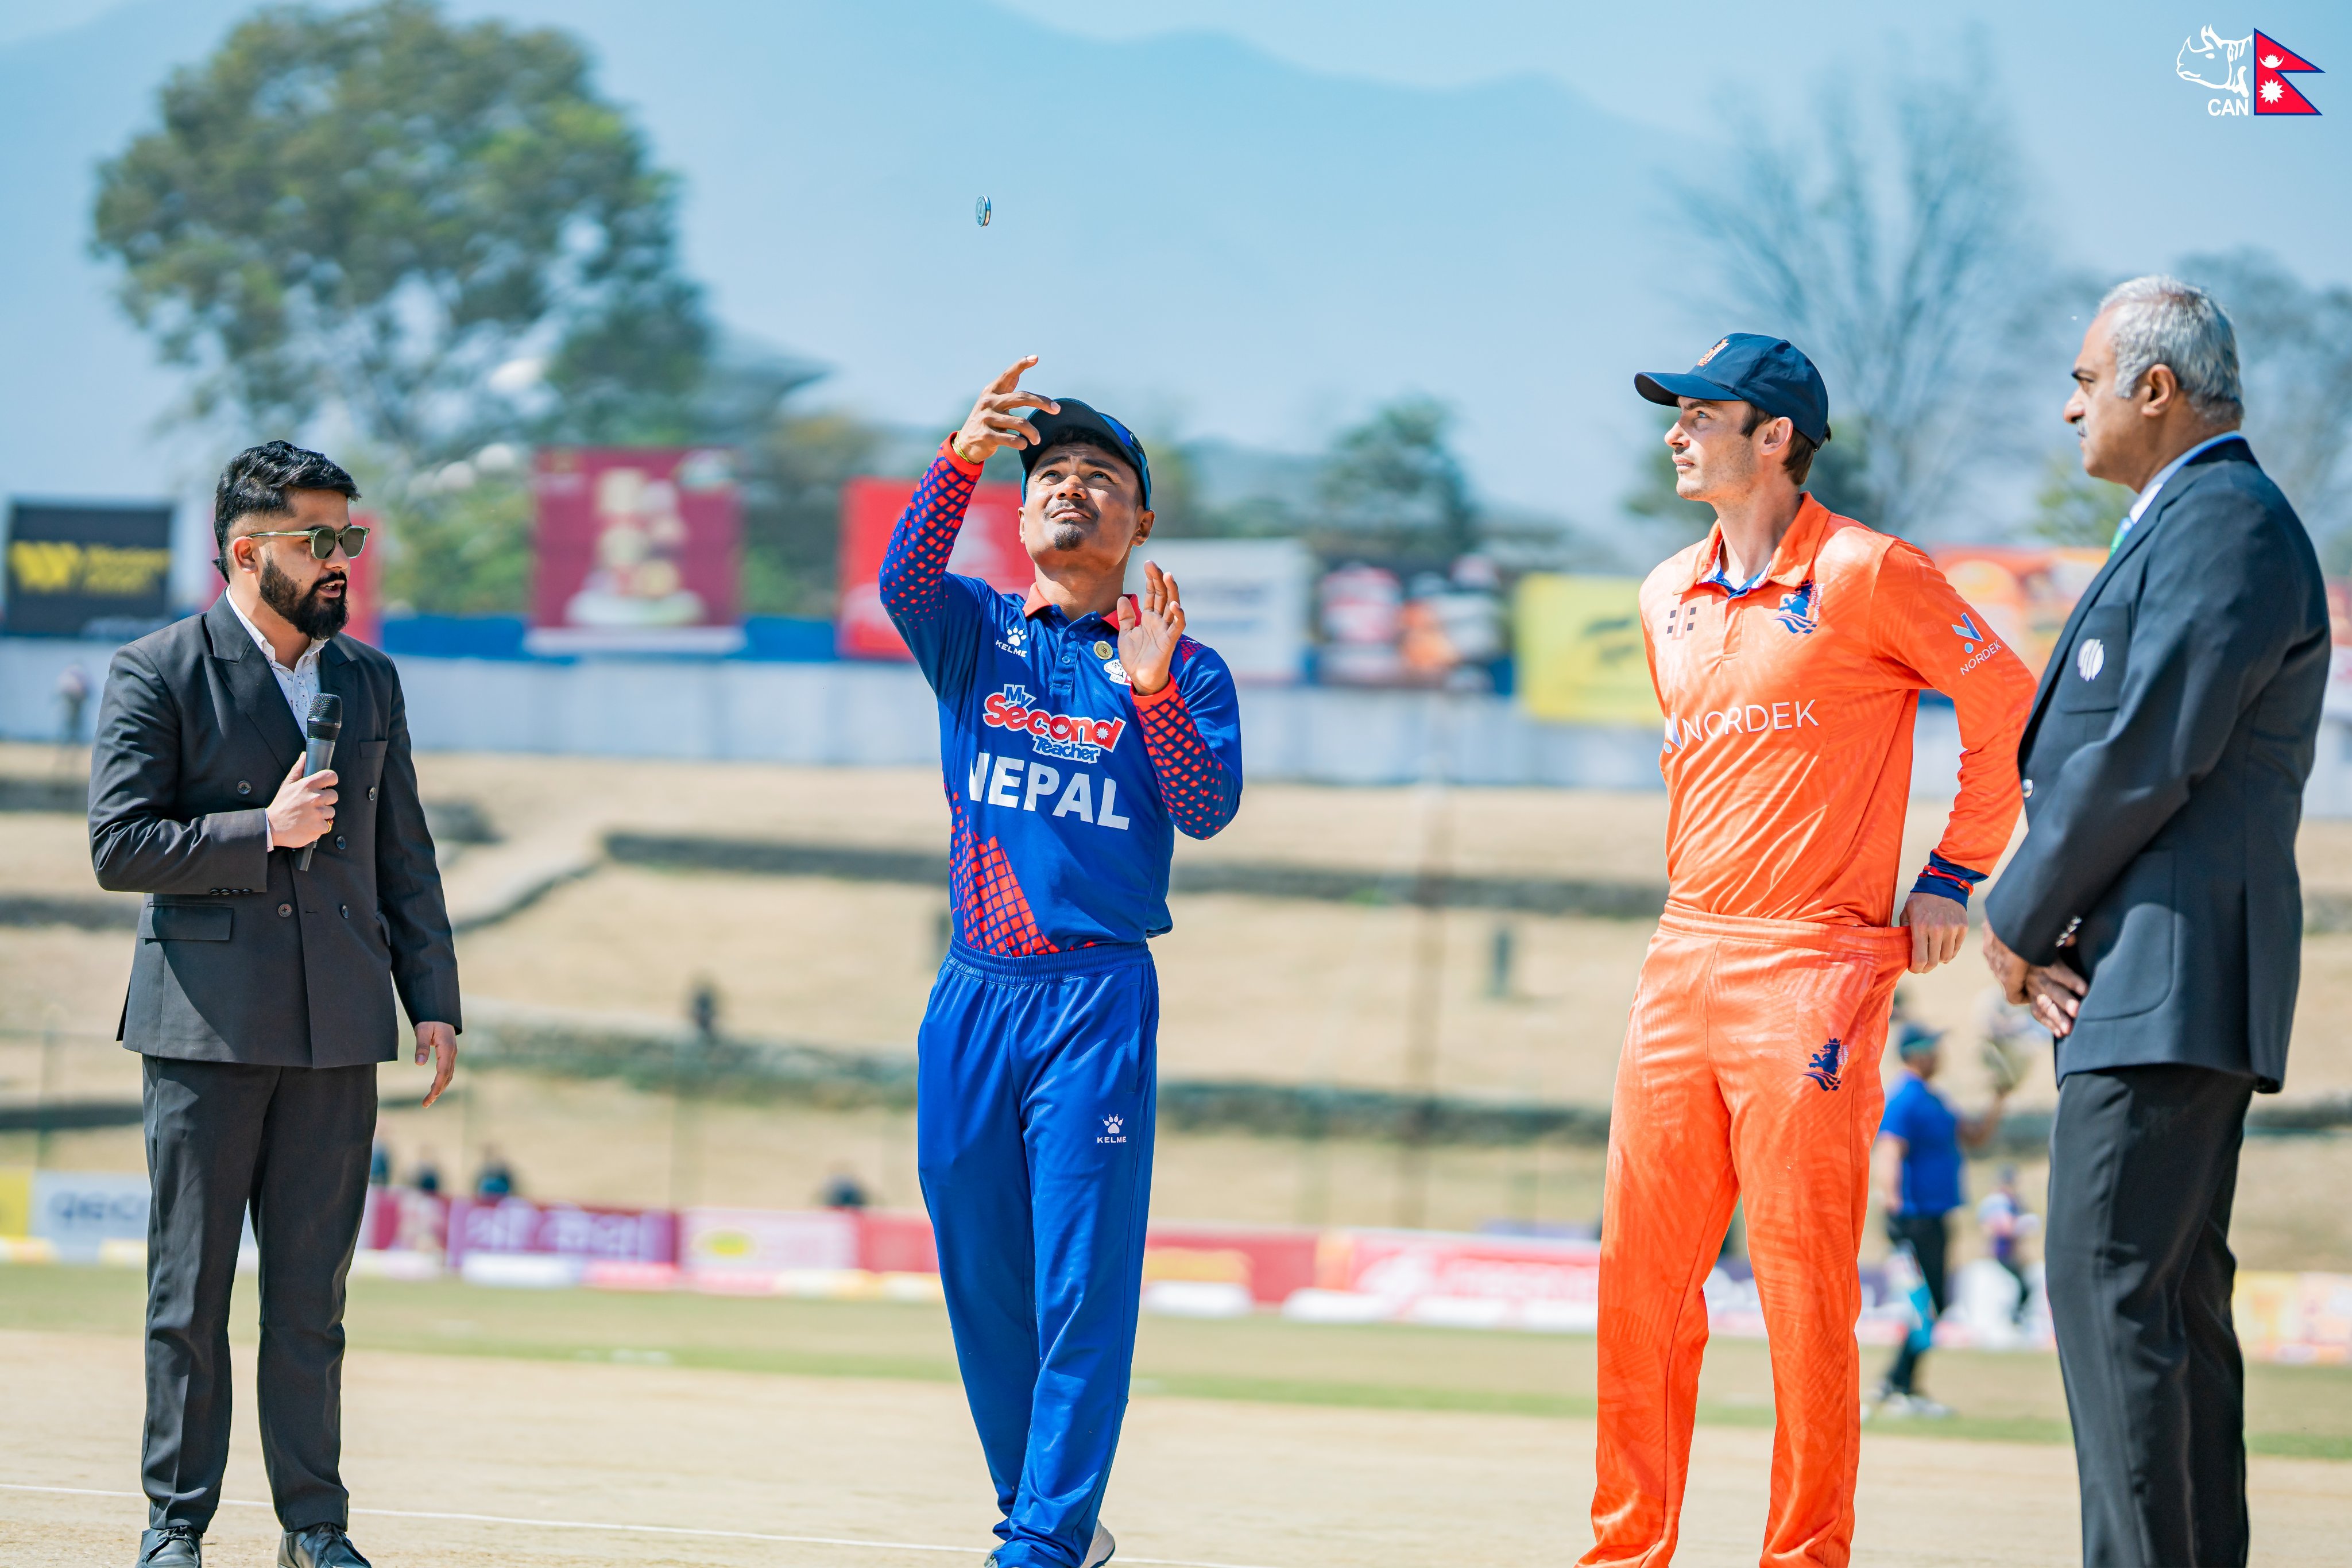 Nepal opts to bowl first against Netherlands in Tri-nations T20I series